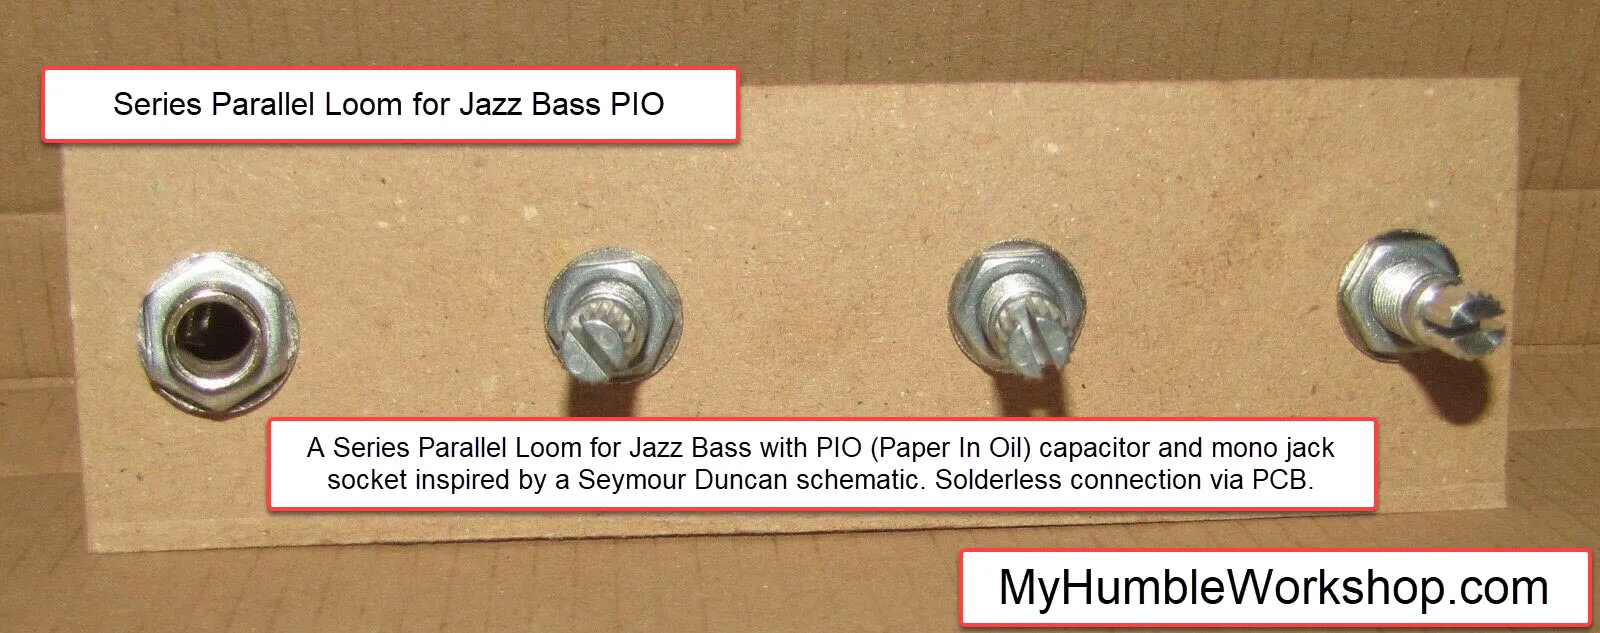 Series Parallel Loom for Jazz bass PIO